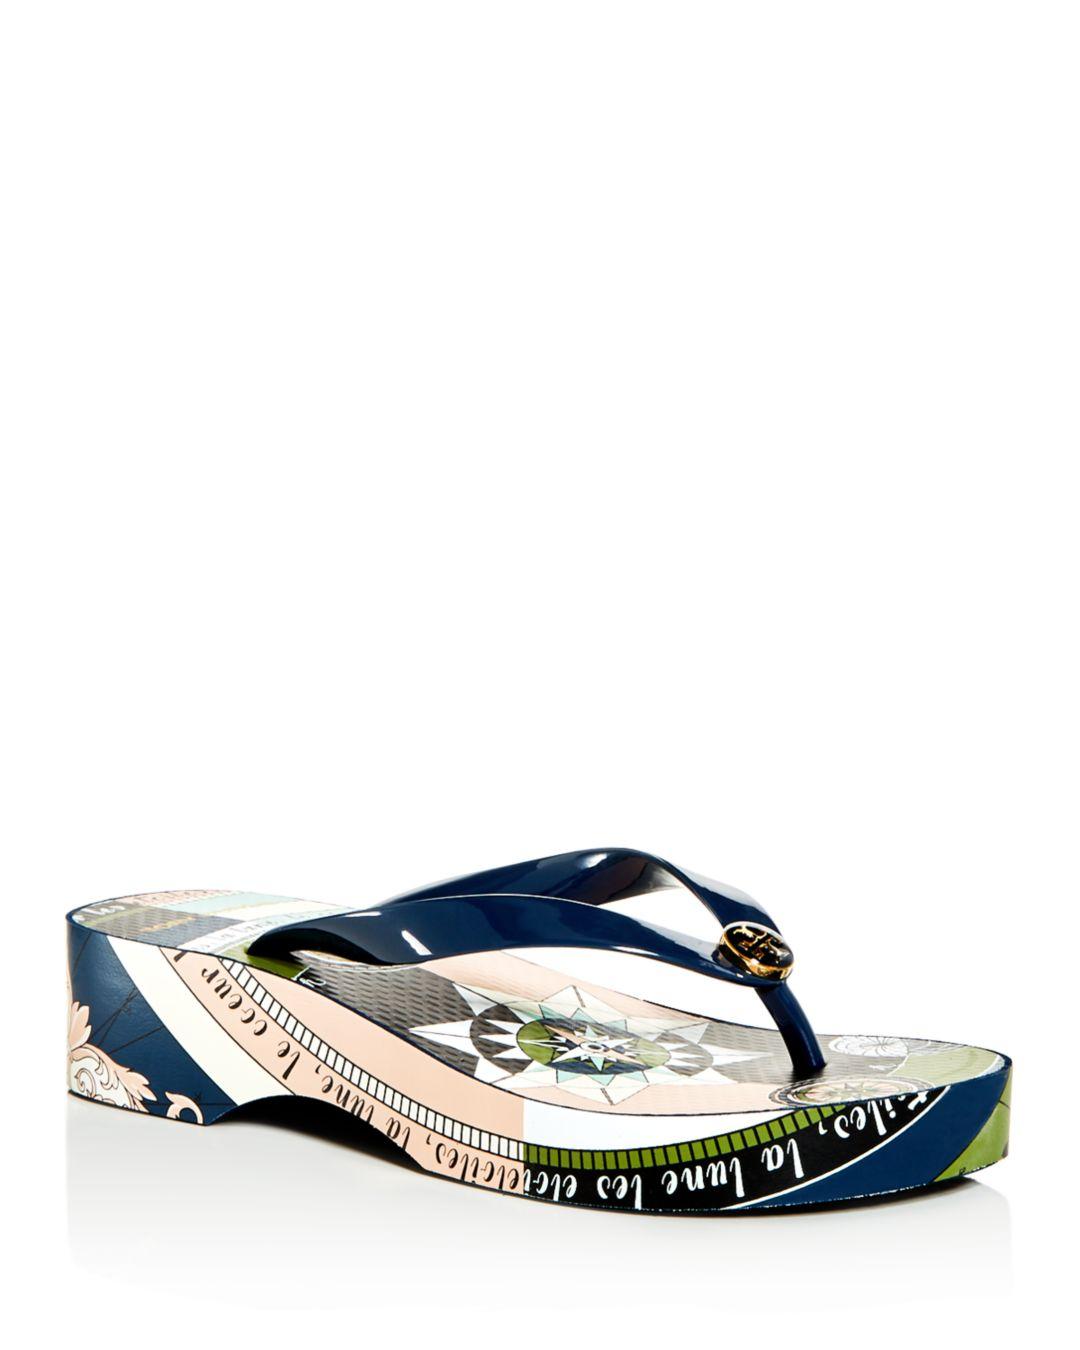 Lyst - Tory Burch Women's Cut-out Wedge Flip-flops in Blue - Save 21%